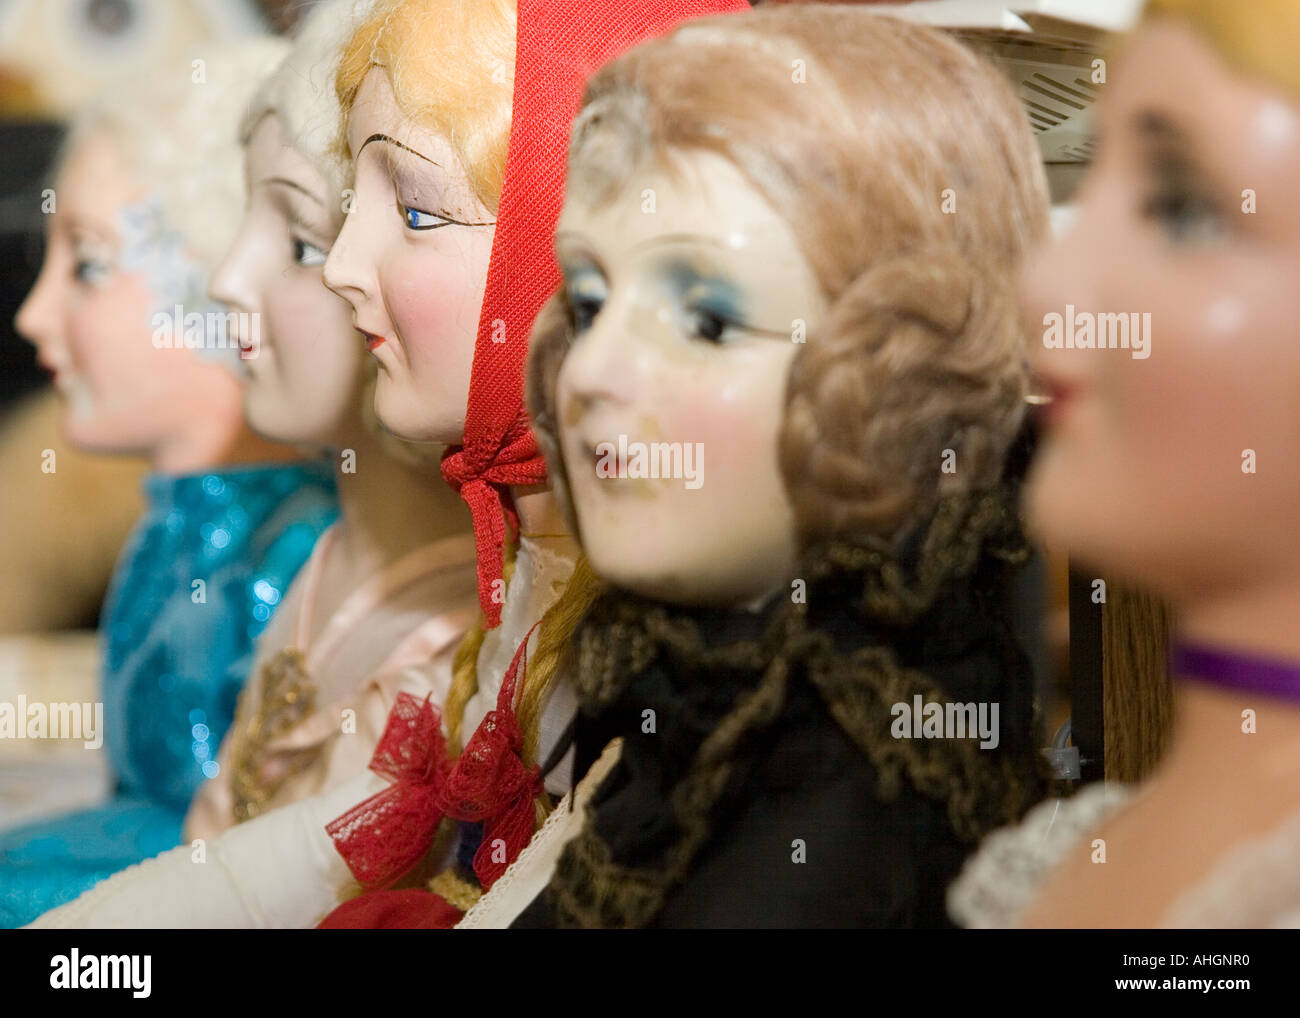 An artfully displayed collection of antique china [bisque] doll parts Stock  Photo - Alamy